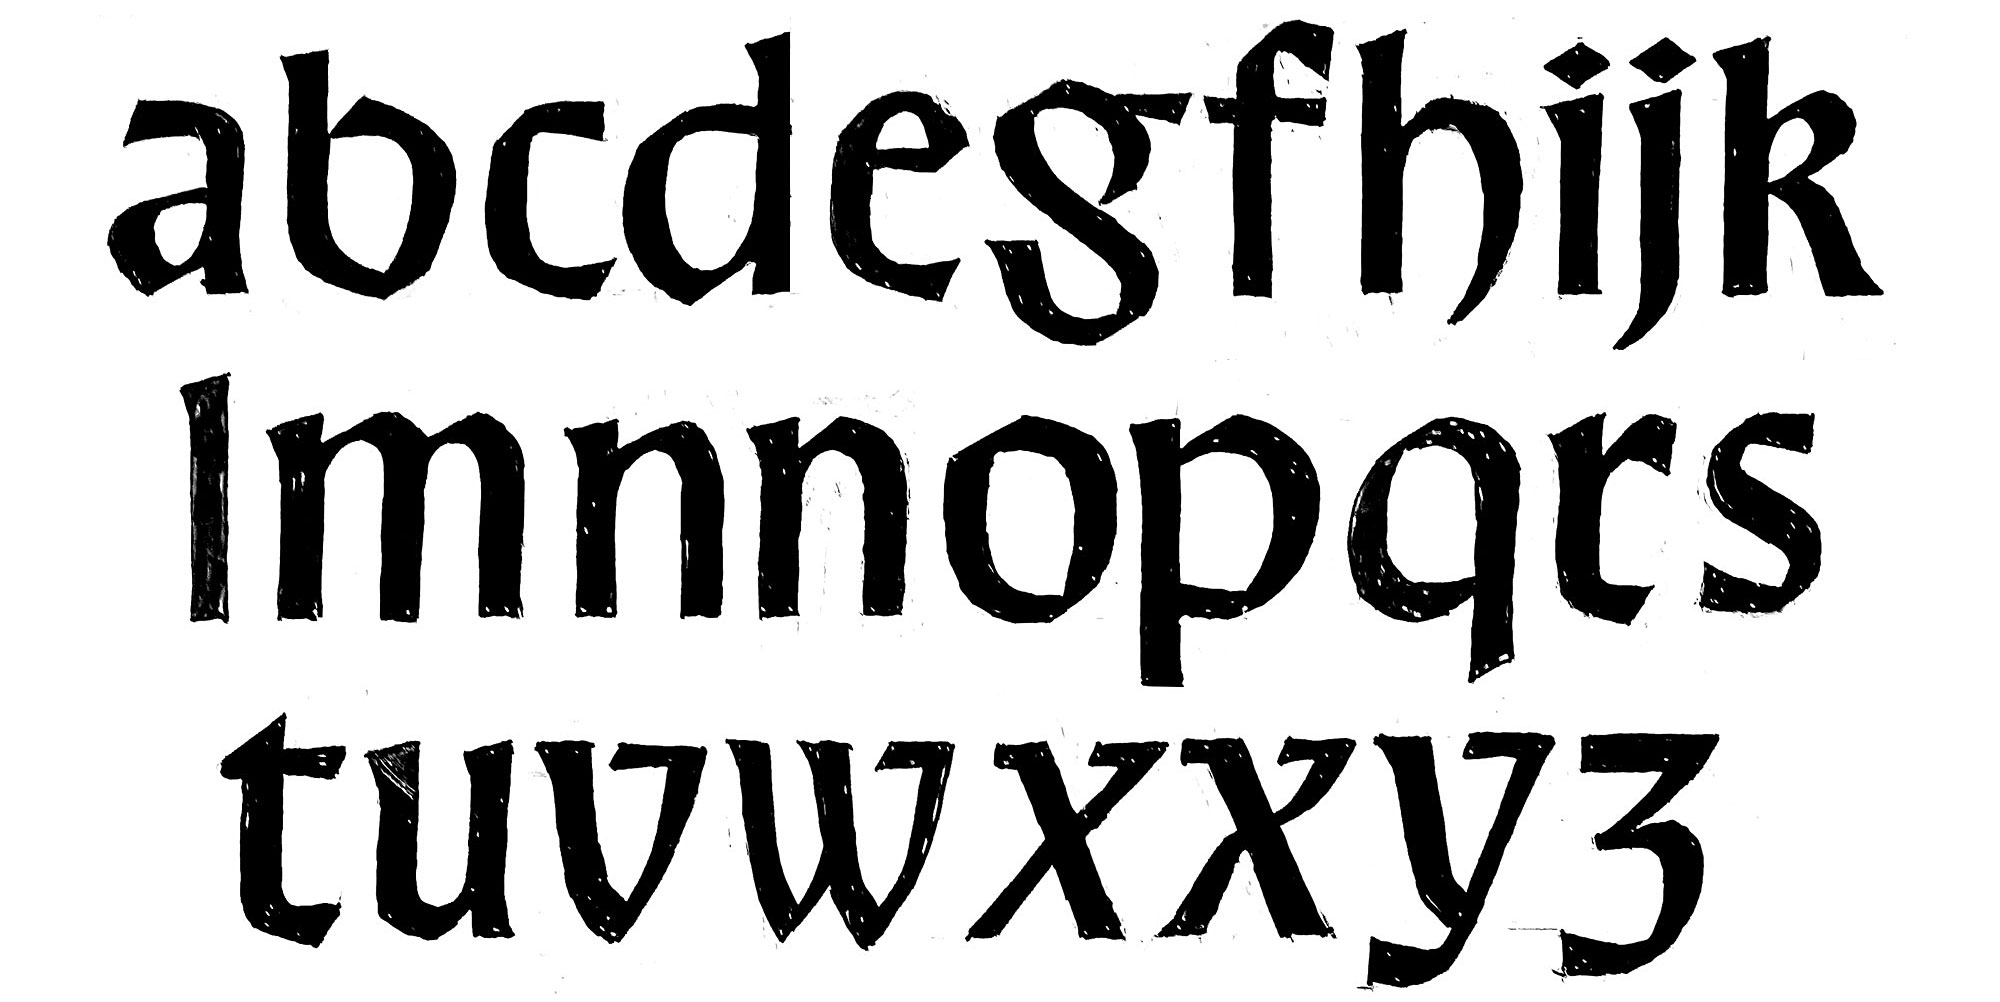 Manual type sketches of the letters a to z